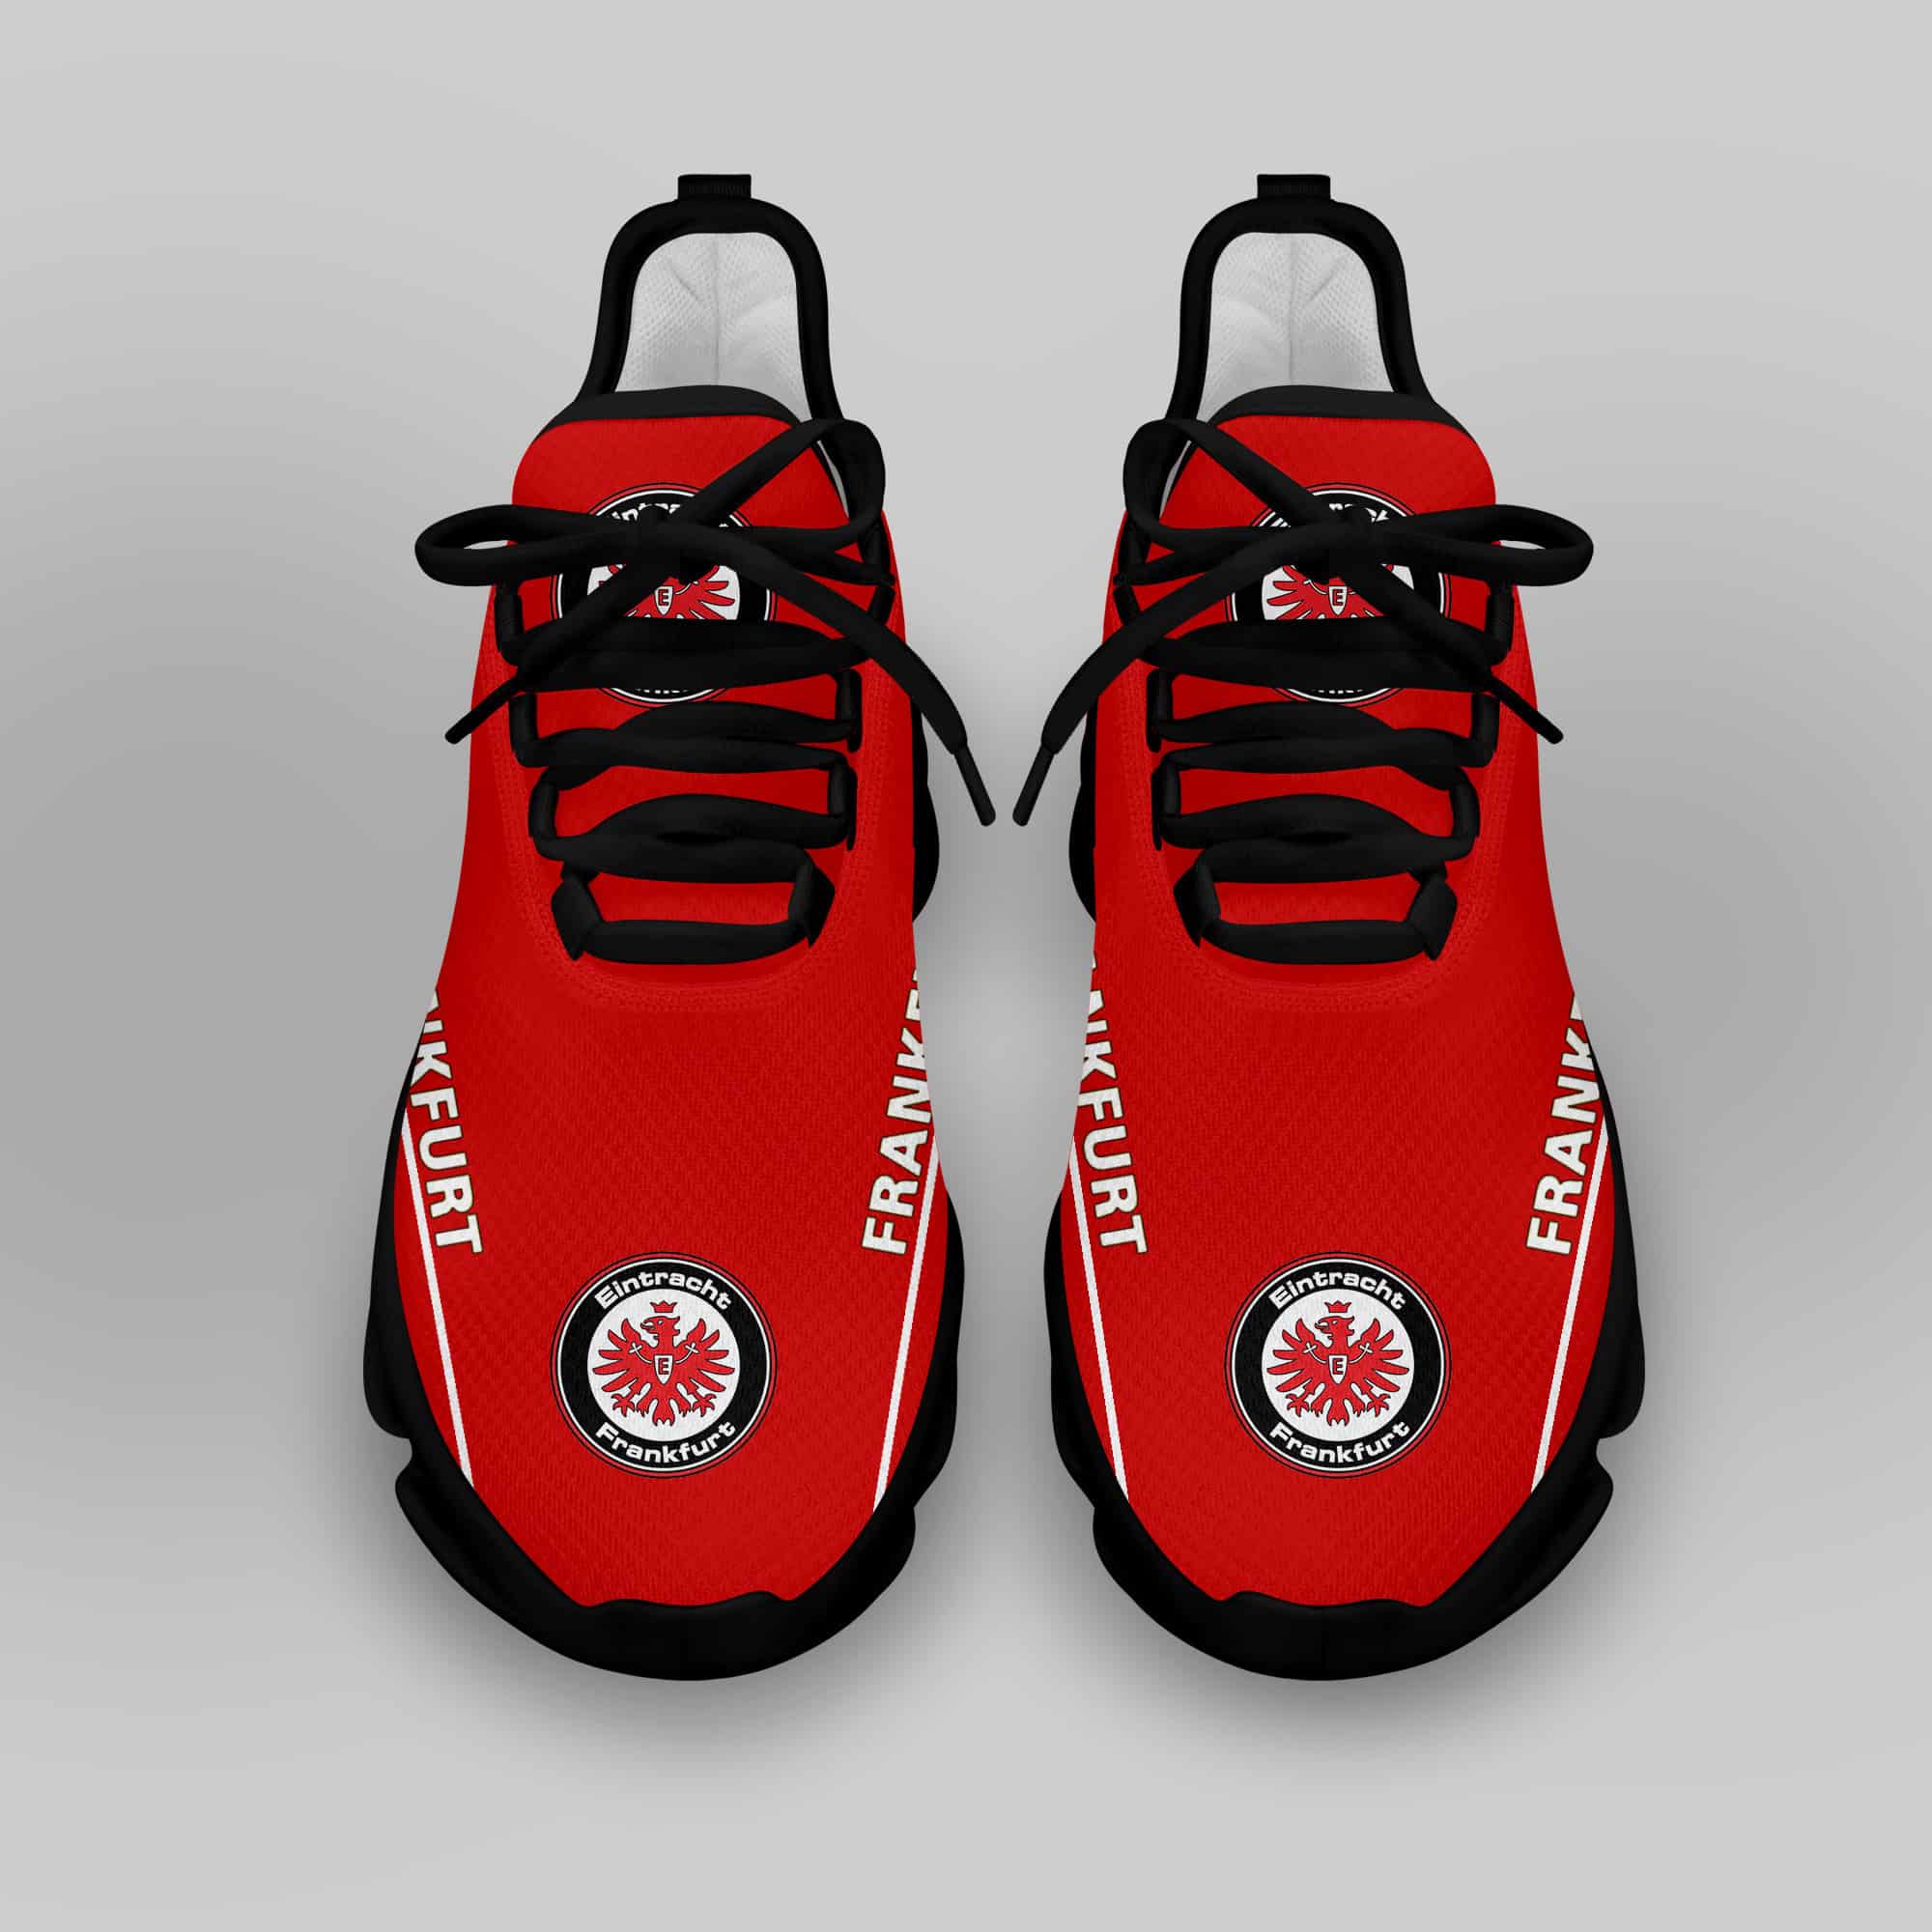 Eintracht Frankfurt Running Shoes Max Soul Shoes Sneakers Ver 13 4